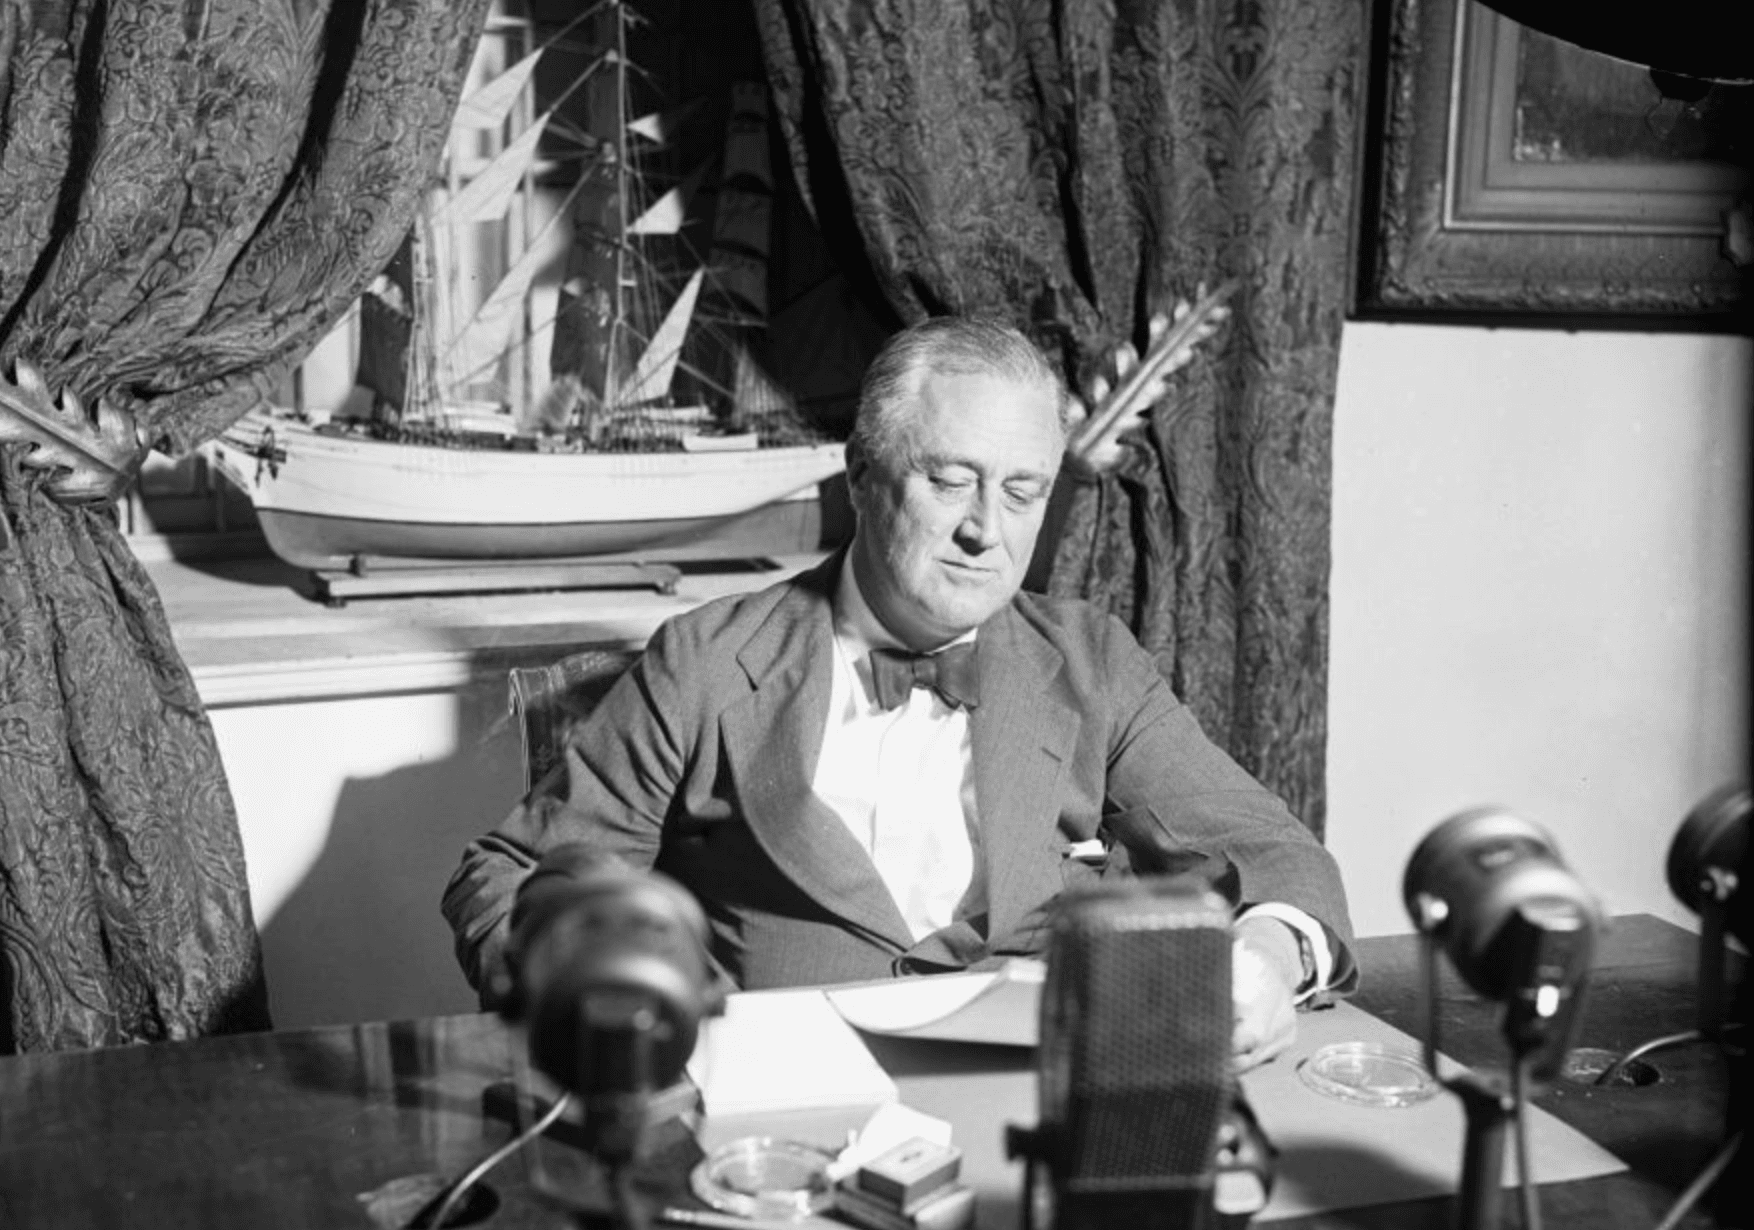 SPENDER: Franklin Delano Roosevelt told the American people of his New Deal largesse via his fireside chats